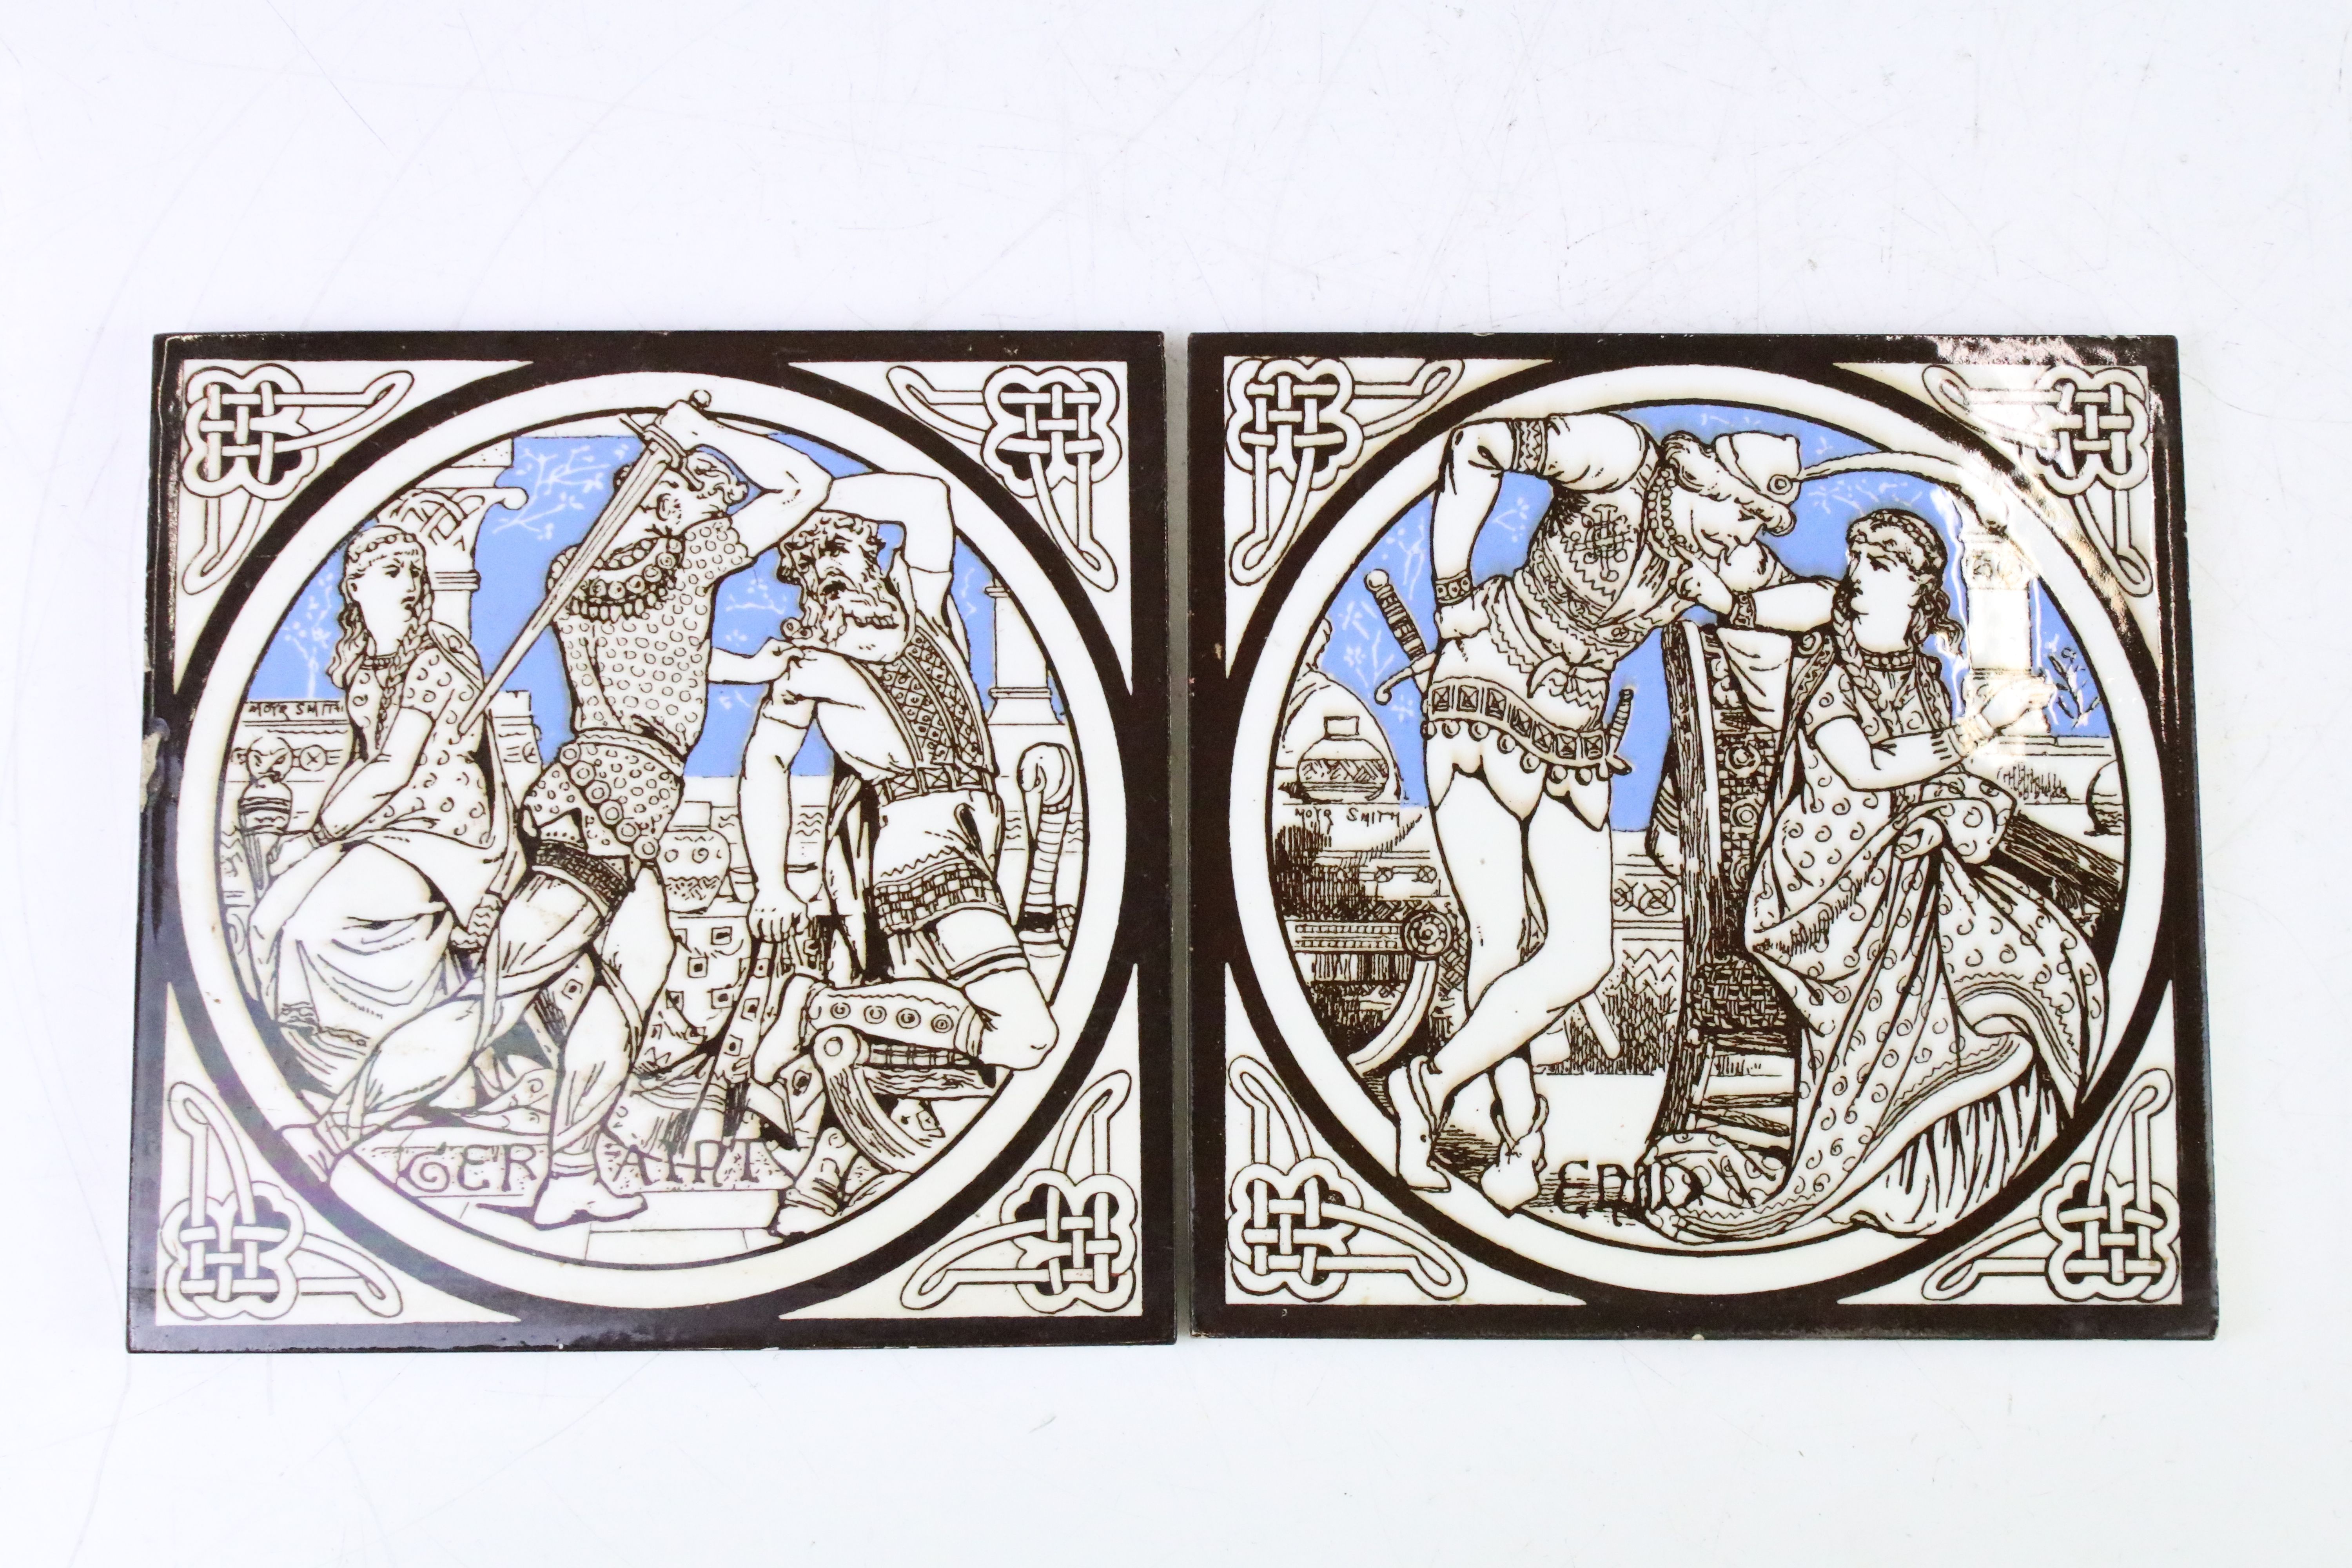 Five Minton China Works Tiles from the Idylls of the King Series designed by J Moyr Smith - Image 5 of 8